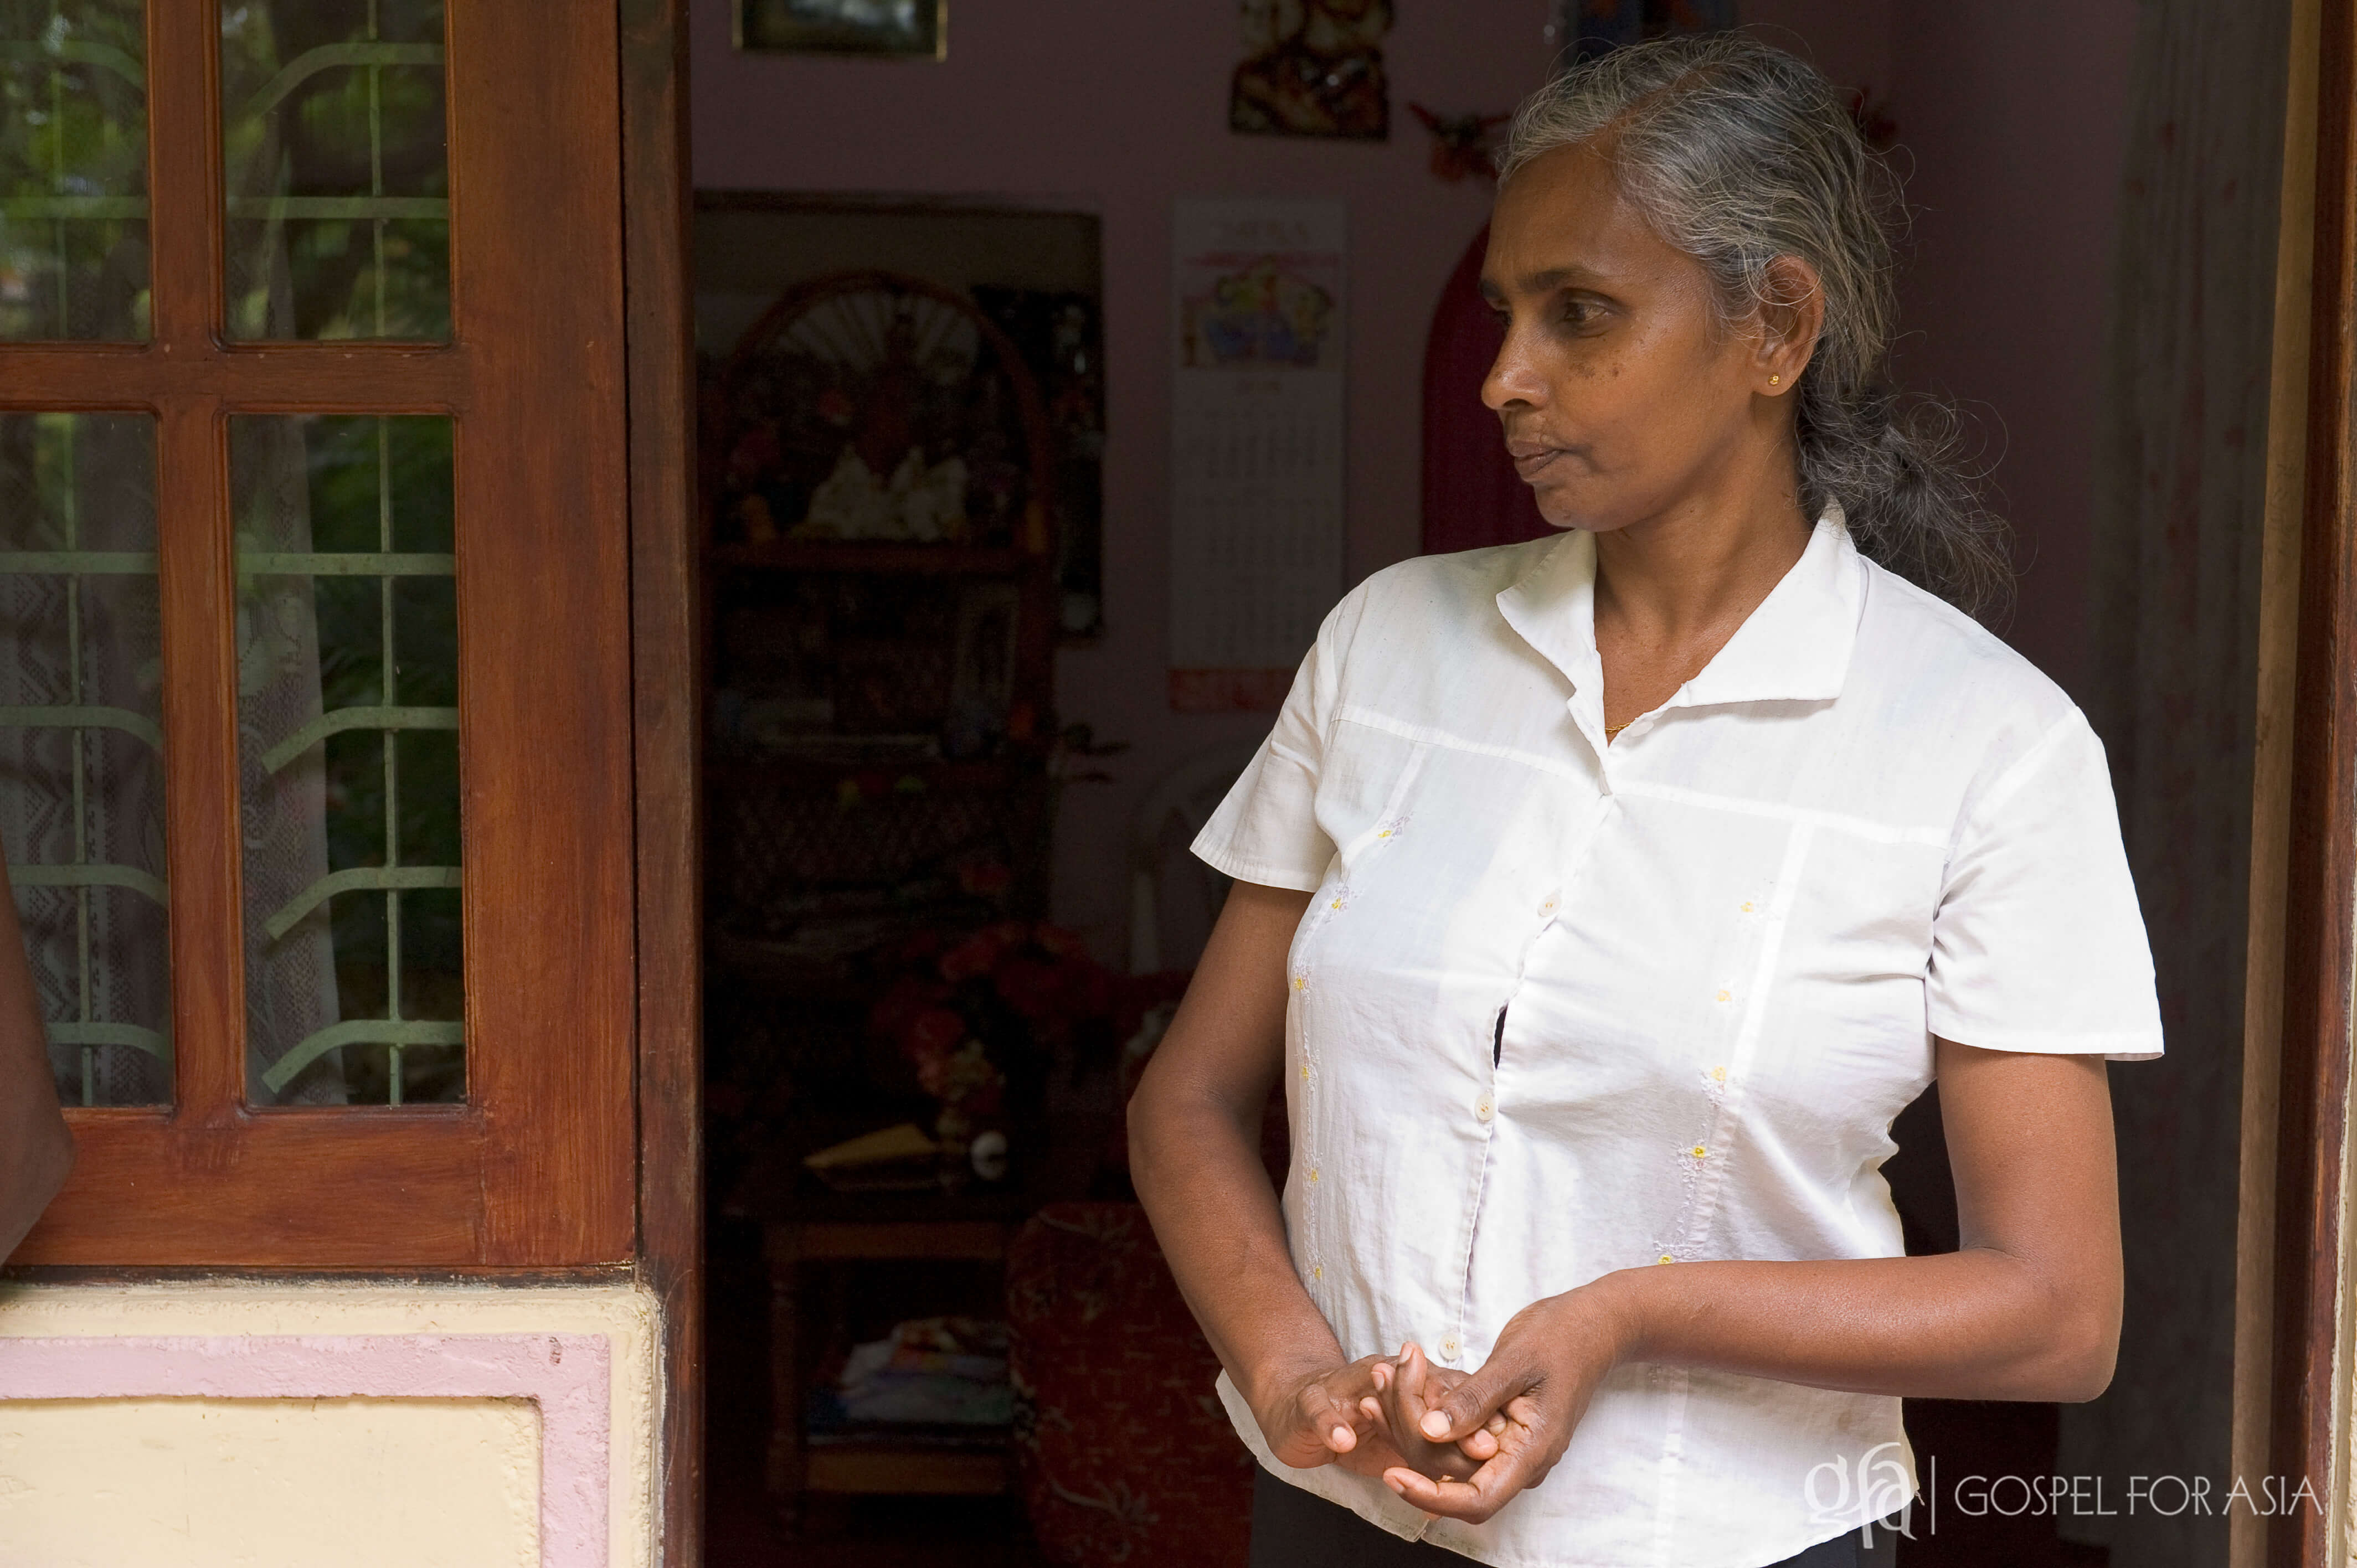 A mother in Sri Lanka, whose husband is having health problems, would face an uncertain future if he were not to improve.